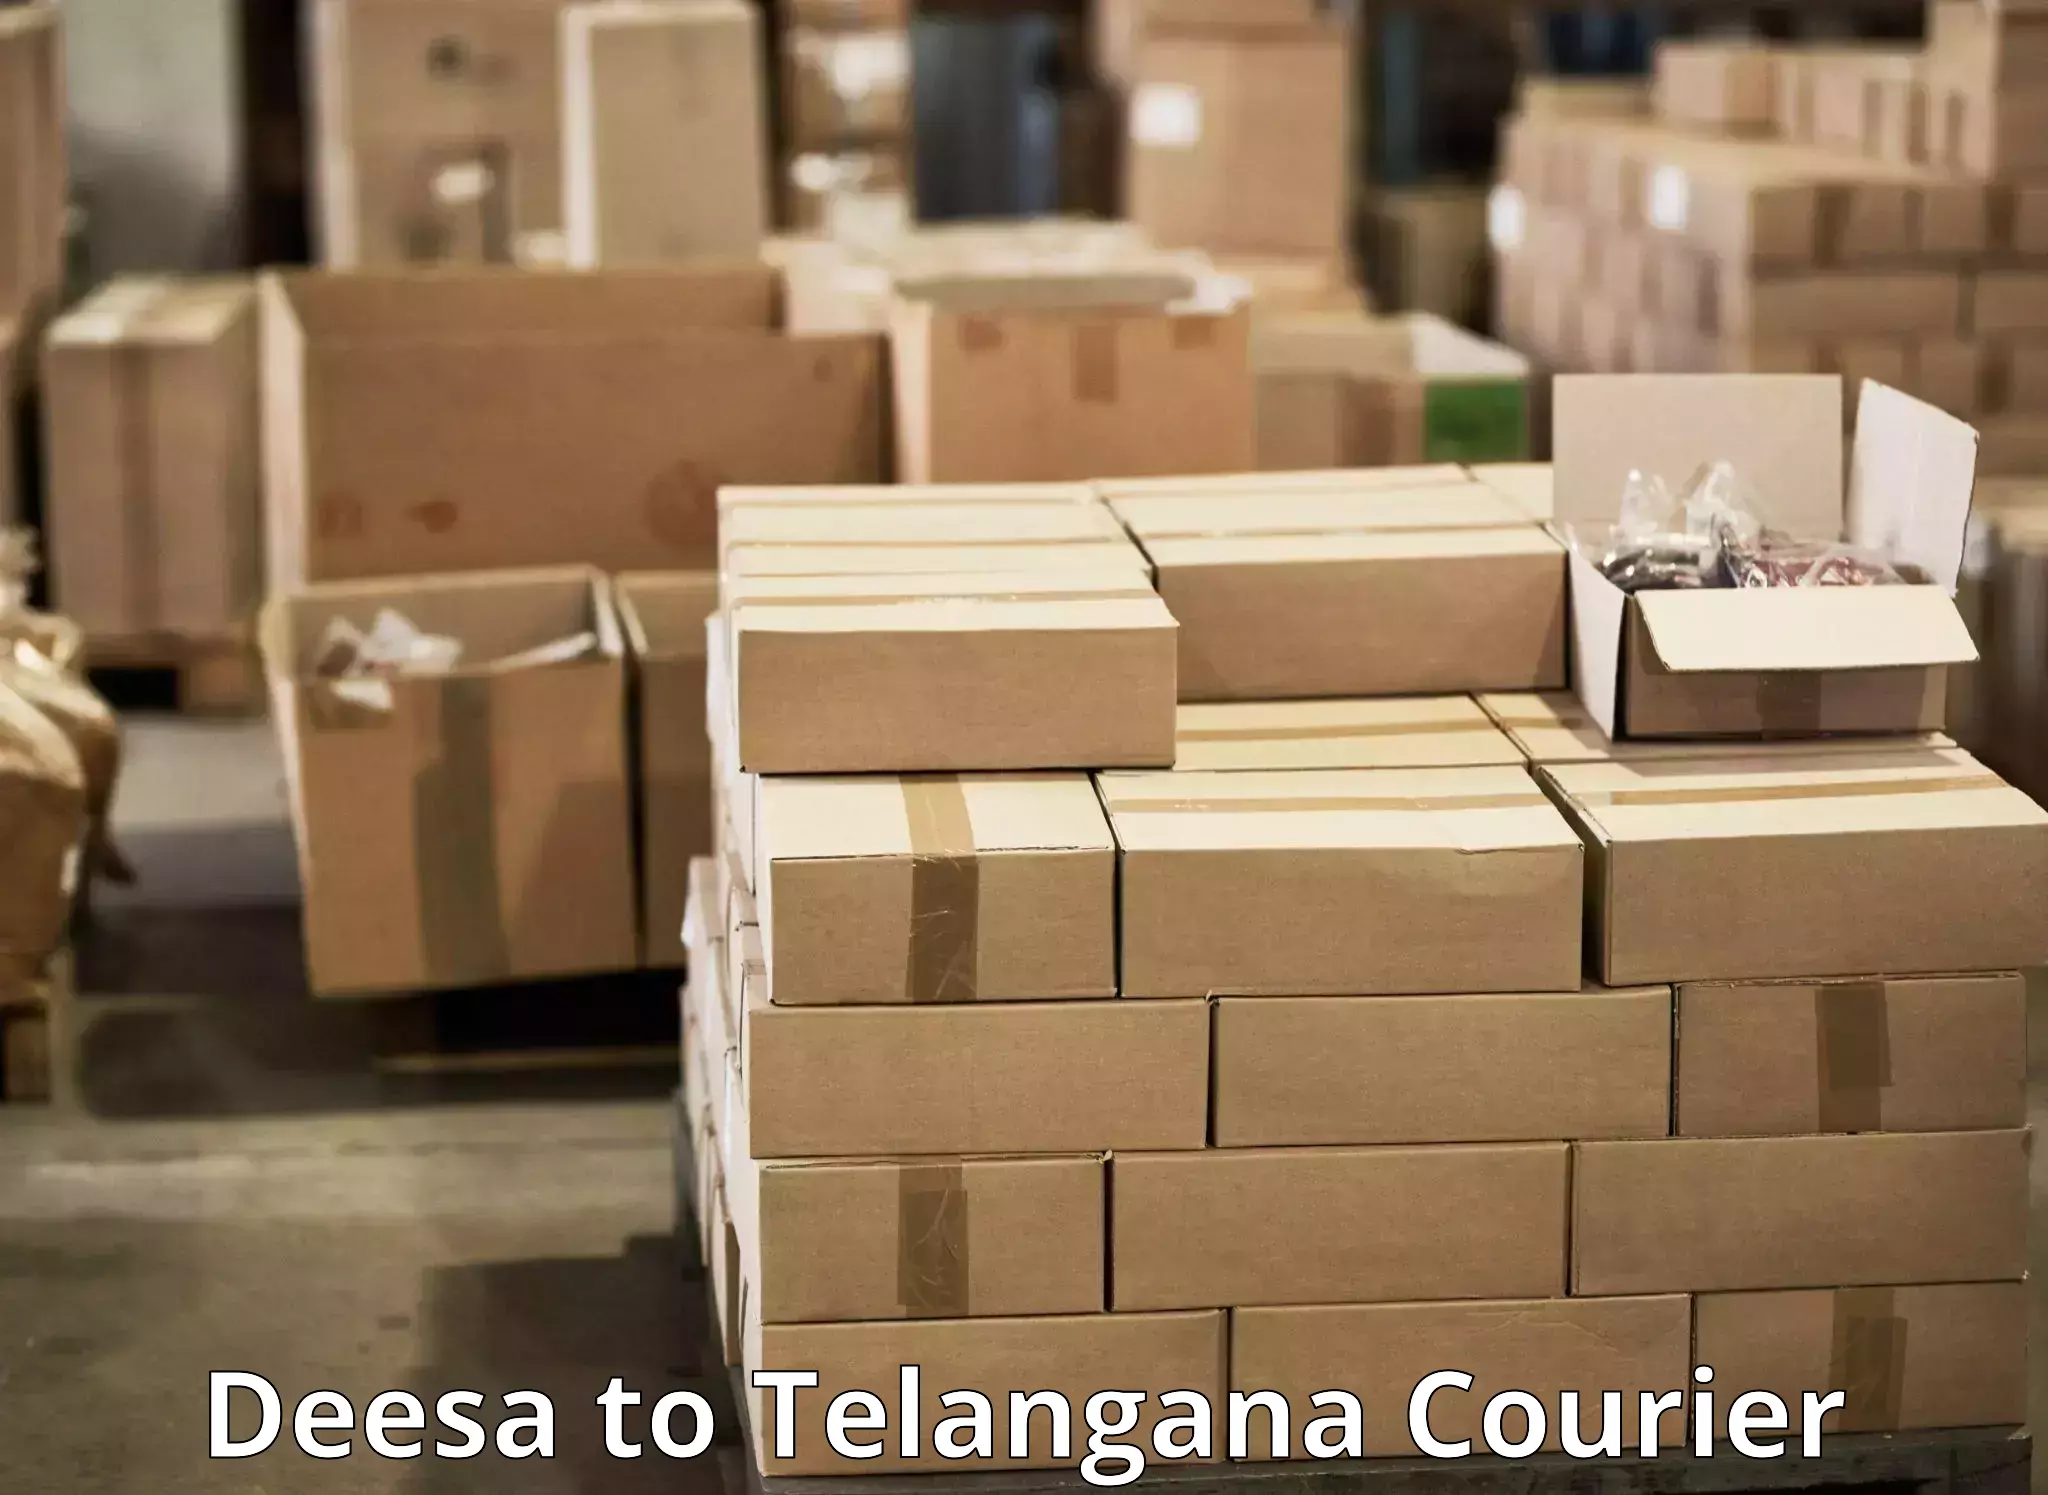 Global shipping networks in Deesa to Hyderabad